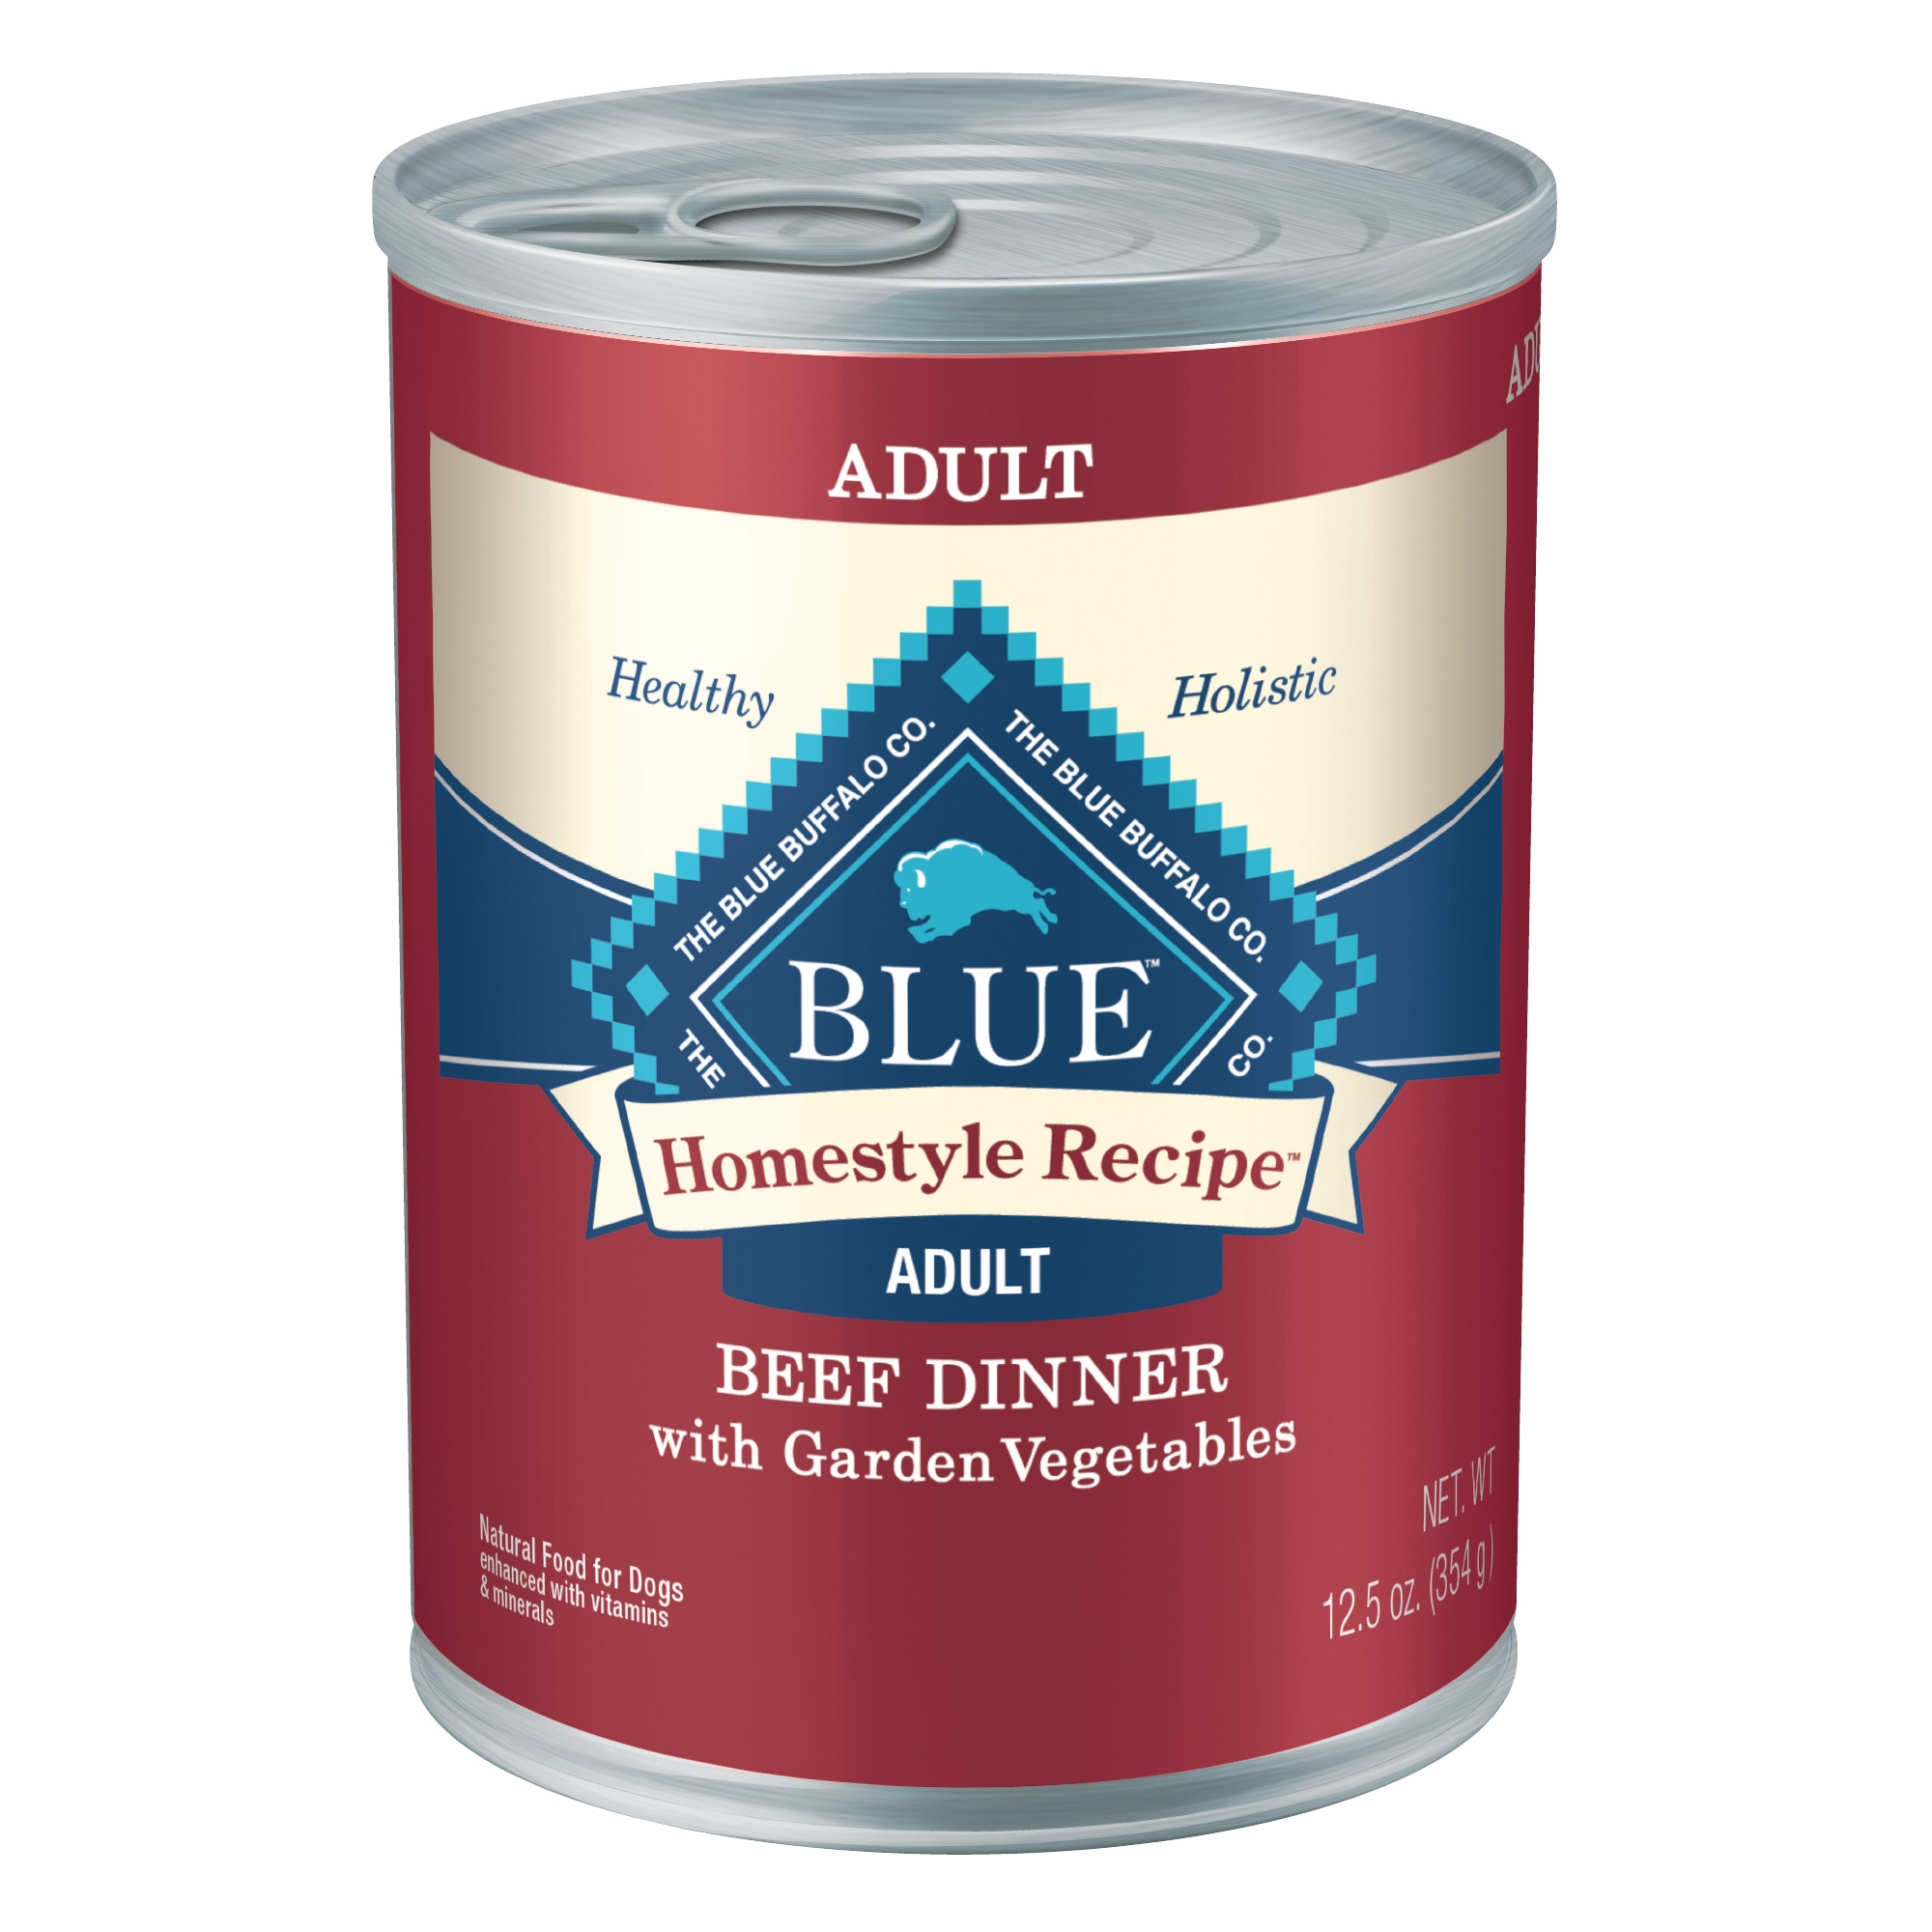 BLUE Homestyle Recipe Beef Dinner with Garden Vegetables for Adult Dogs, 12.5 oz